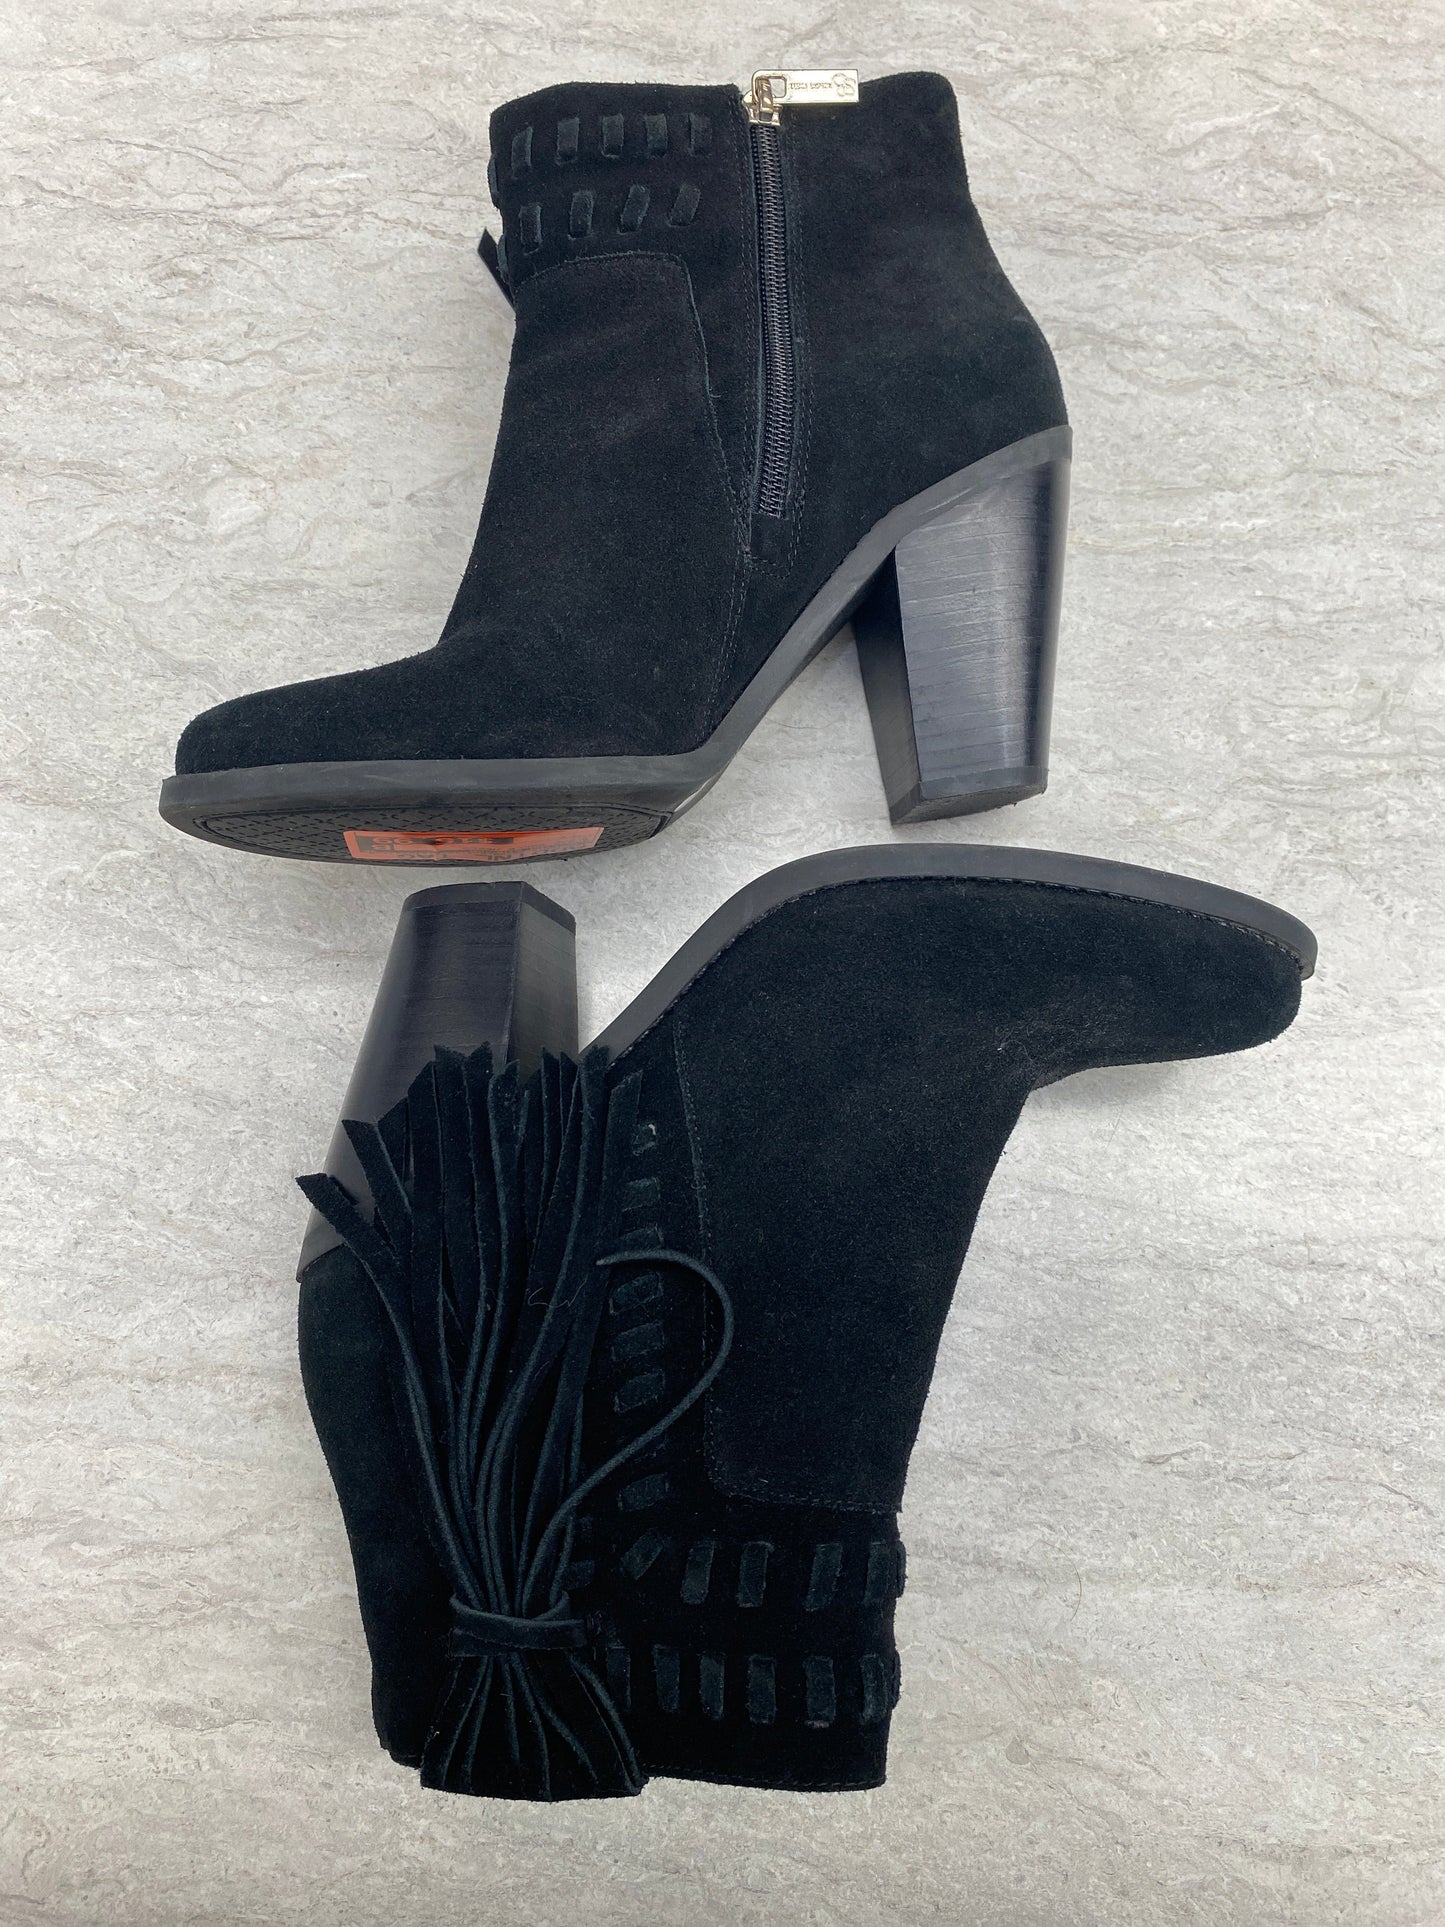 Boots Ankle Heels By Jessica Simpson  Size: 7